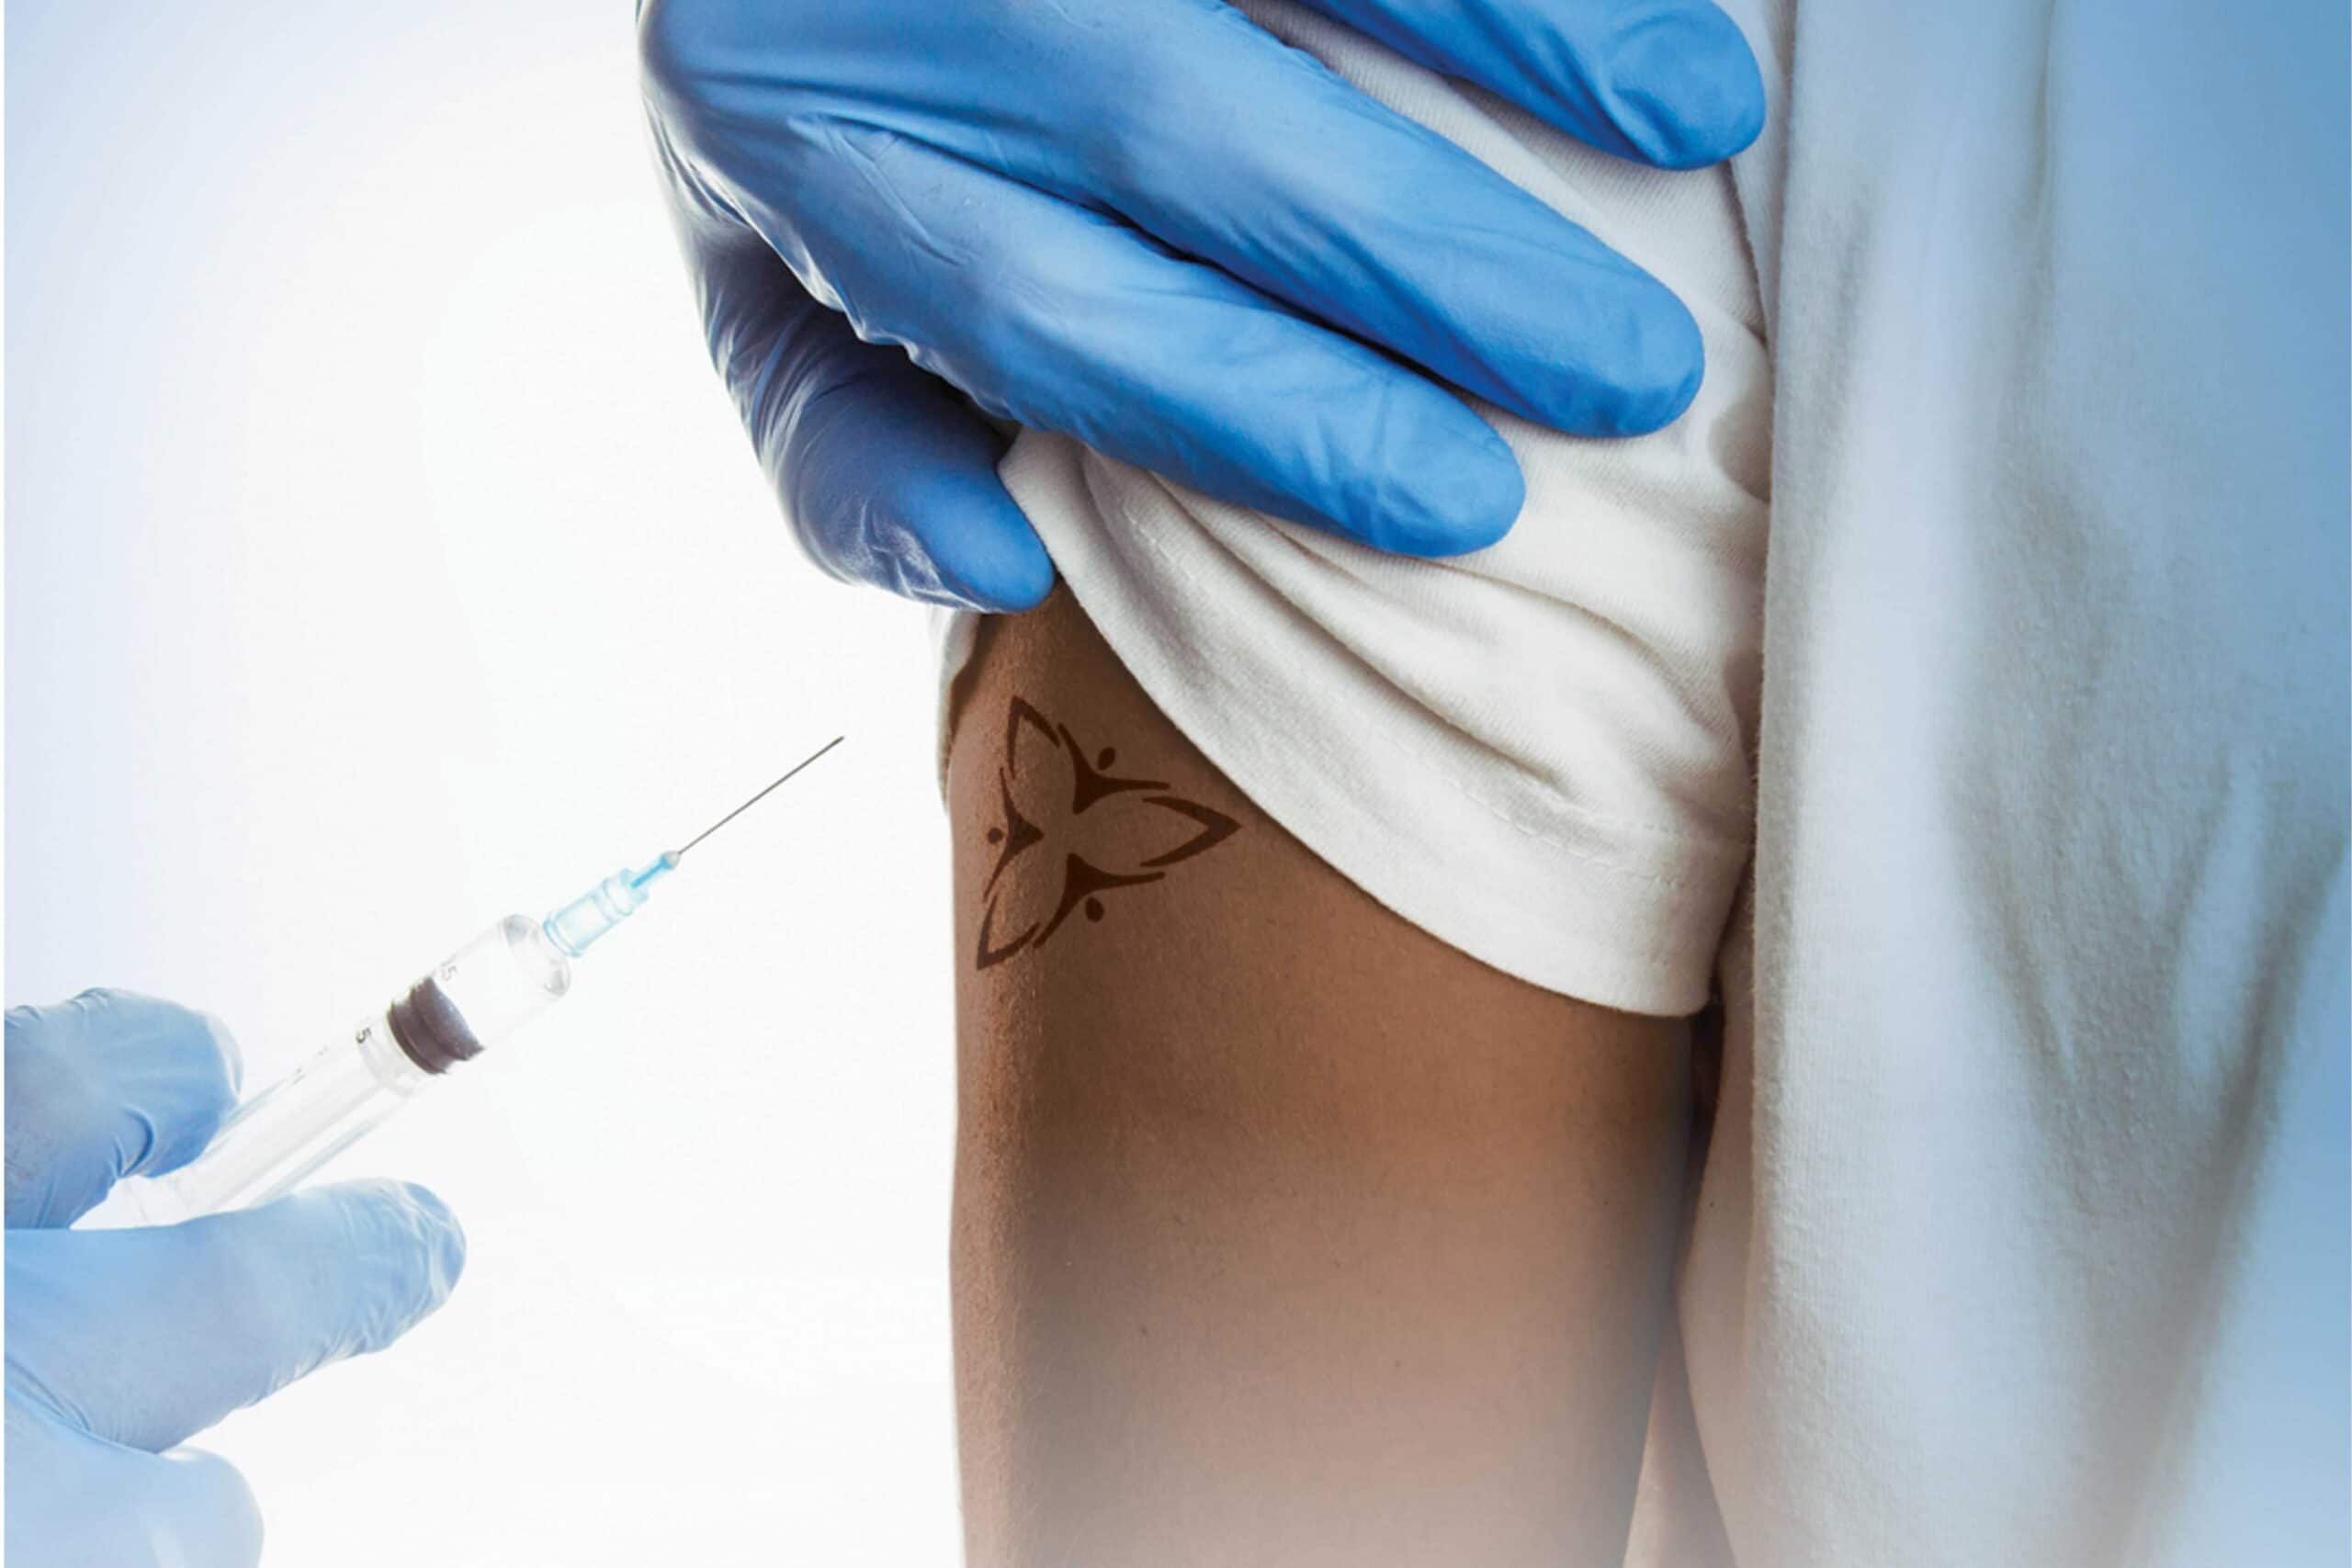 Upper arm with Ontario trillium logo with gloved hand holding vaccine needle beside arm.